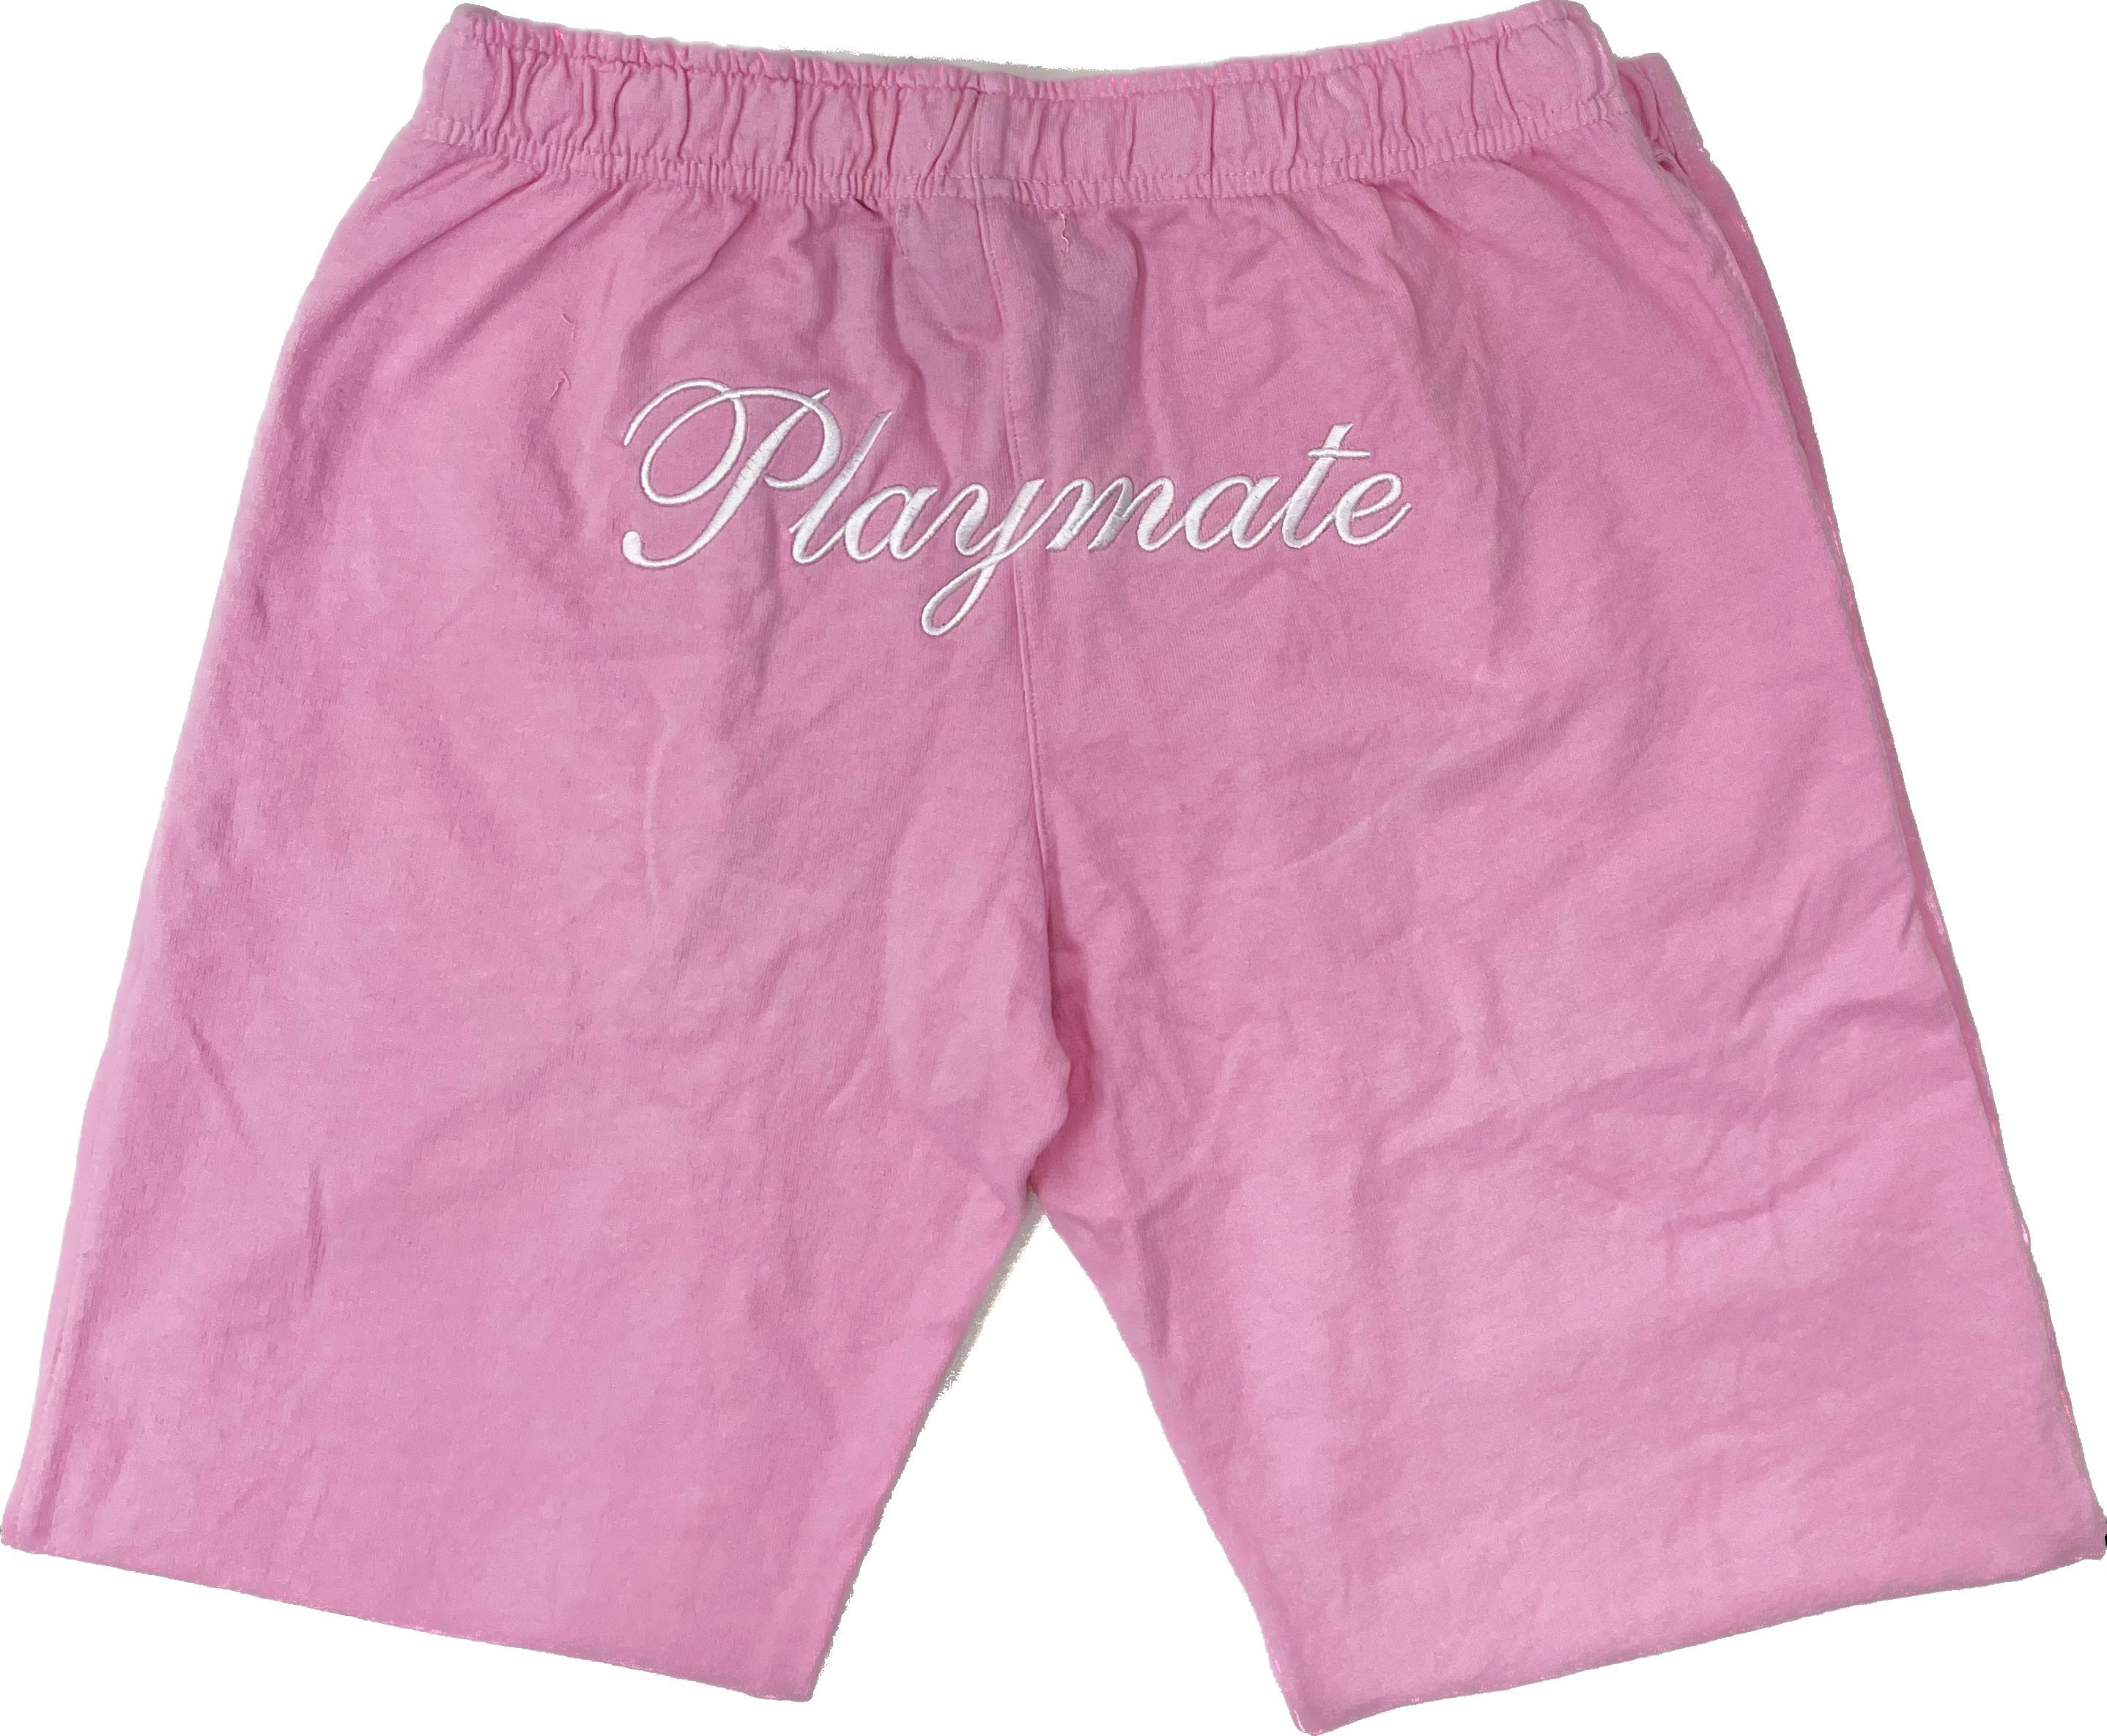 Playmate of the Year Jogger - Pink / White Print